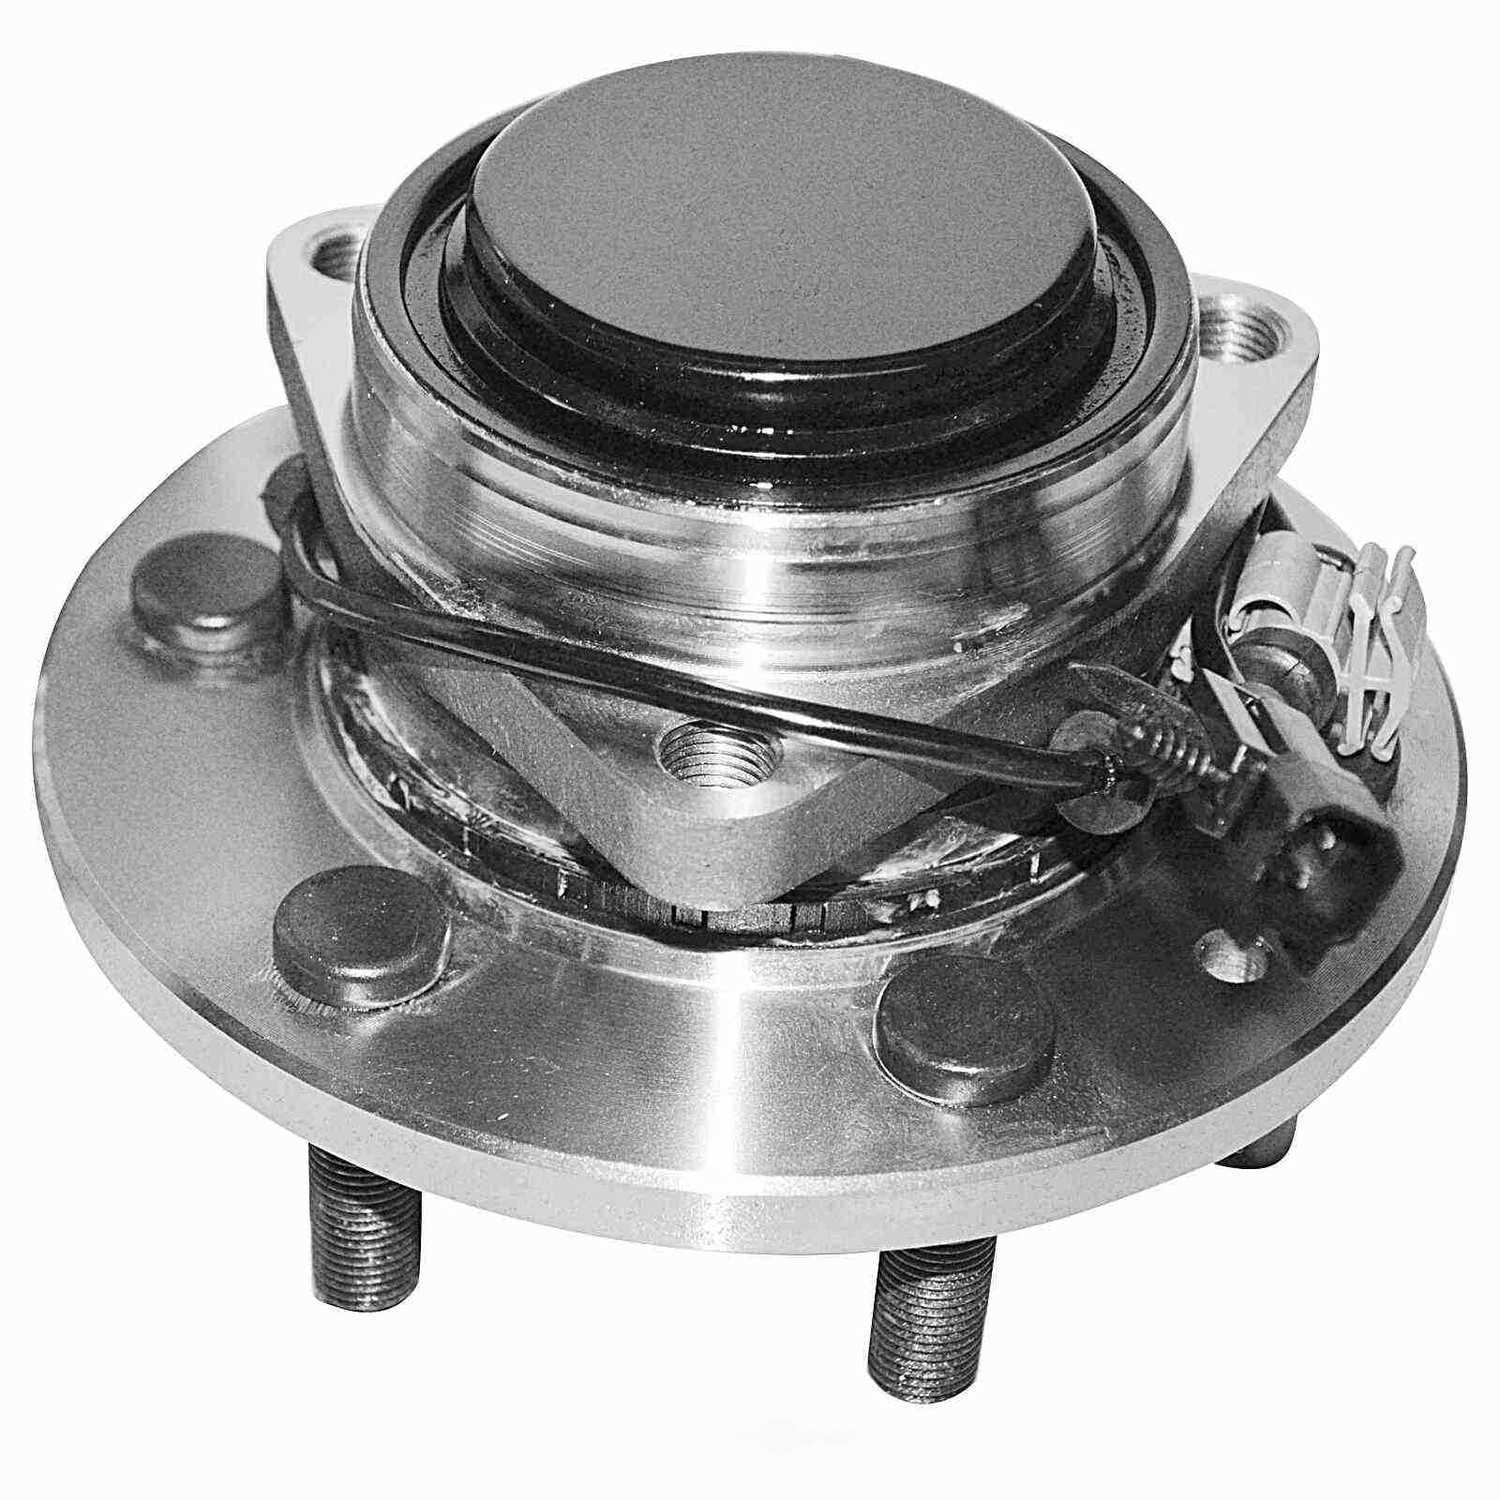 GSP NORTH AMERICA INC. - GSP New Wheel Bearing and Hub Assembly (Front) - AD8 106159